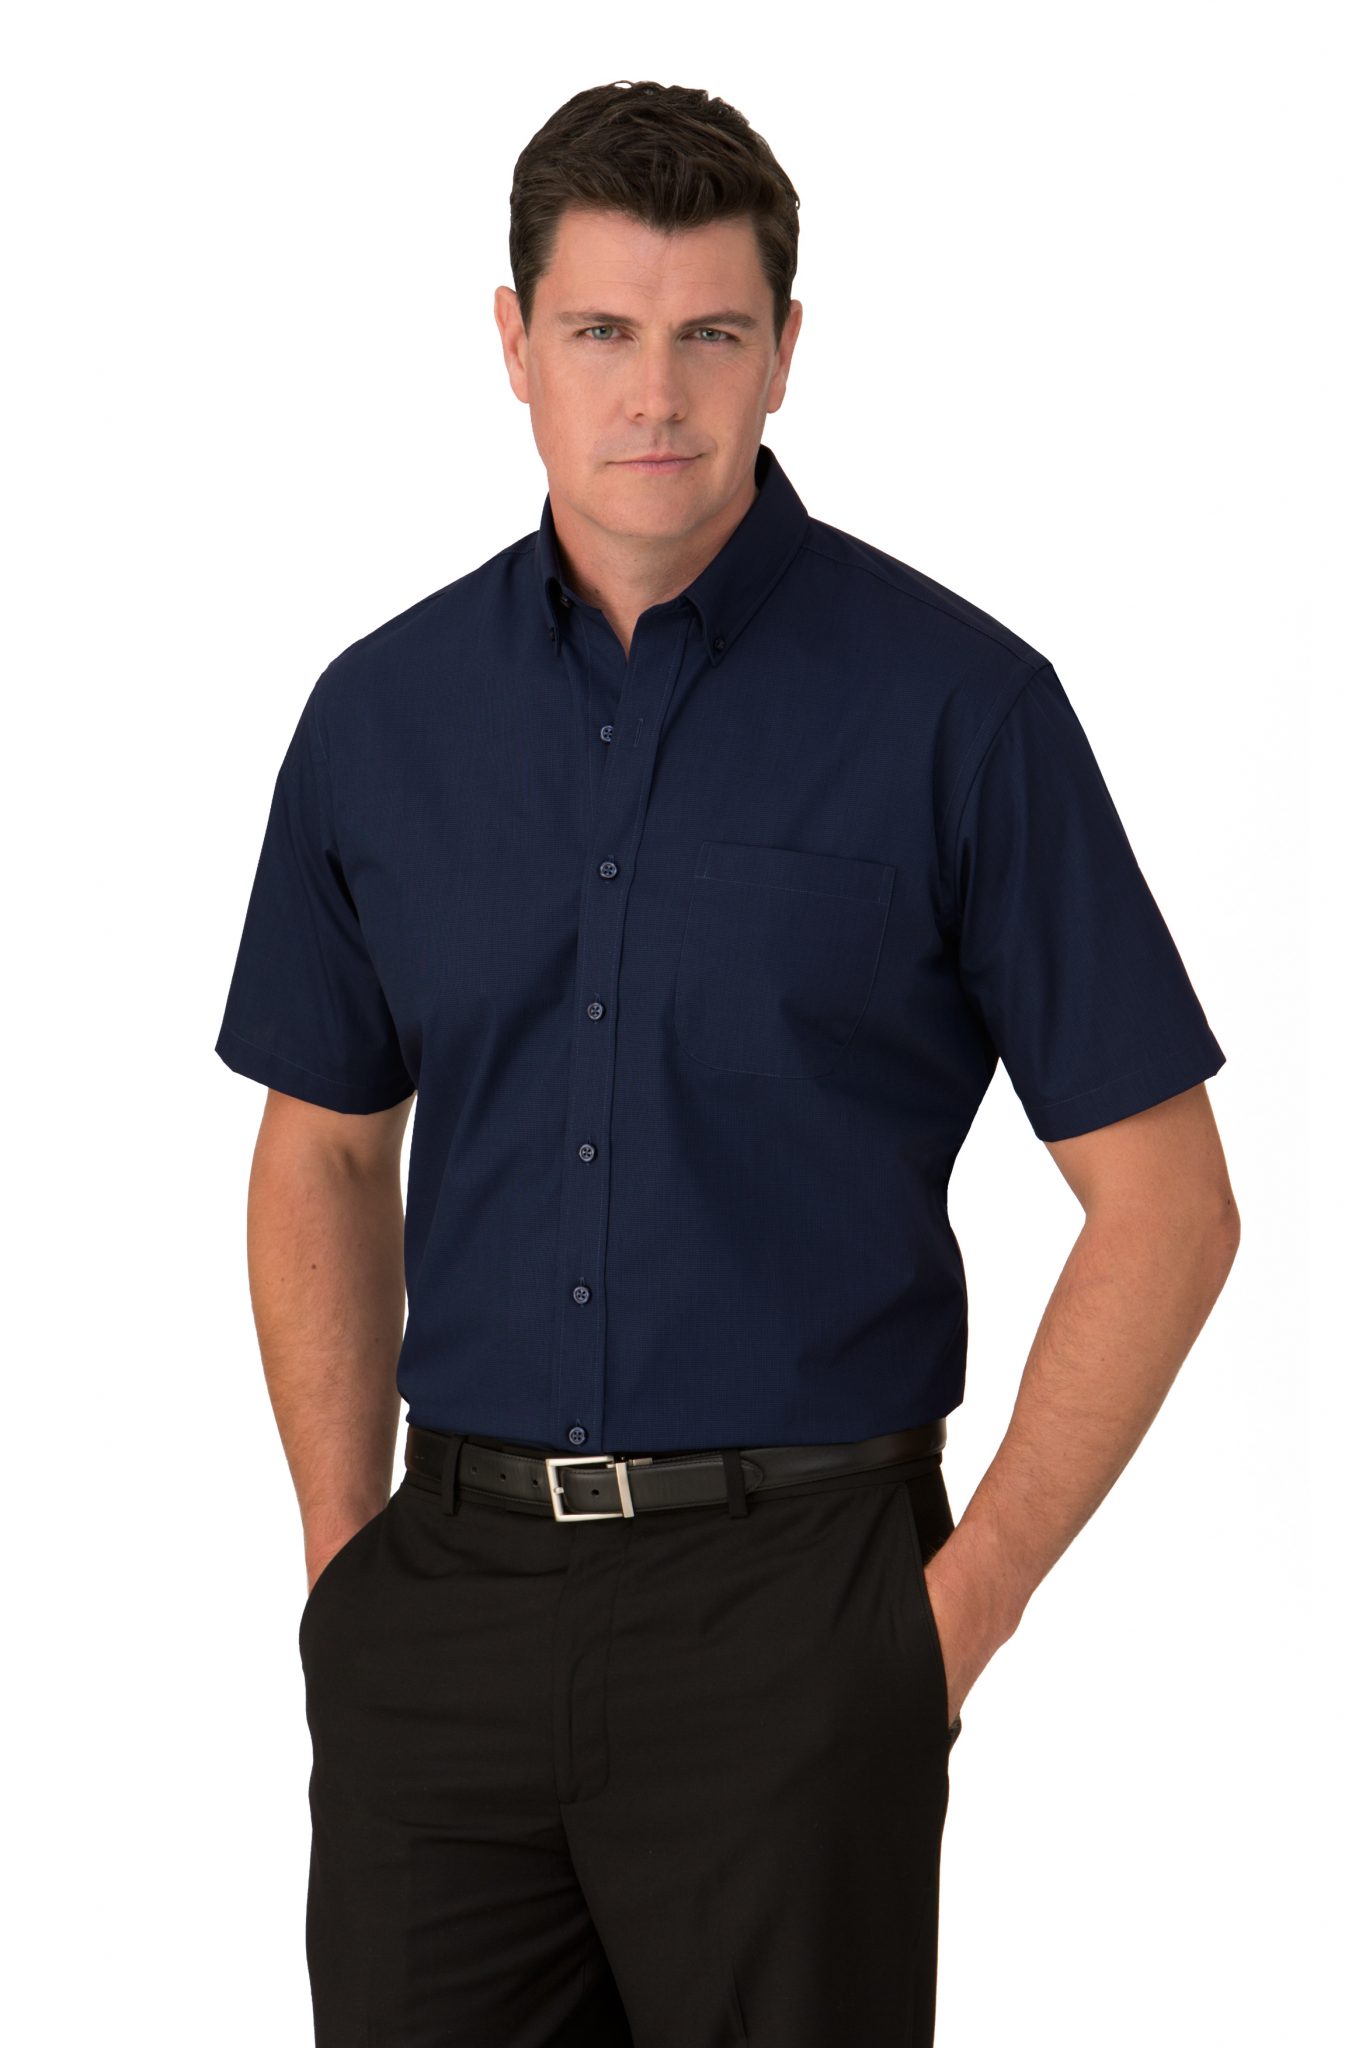 Mens Corporate Shirts S/S